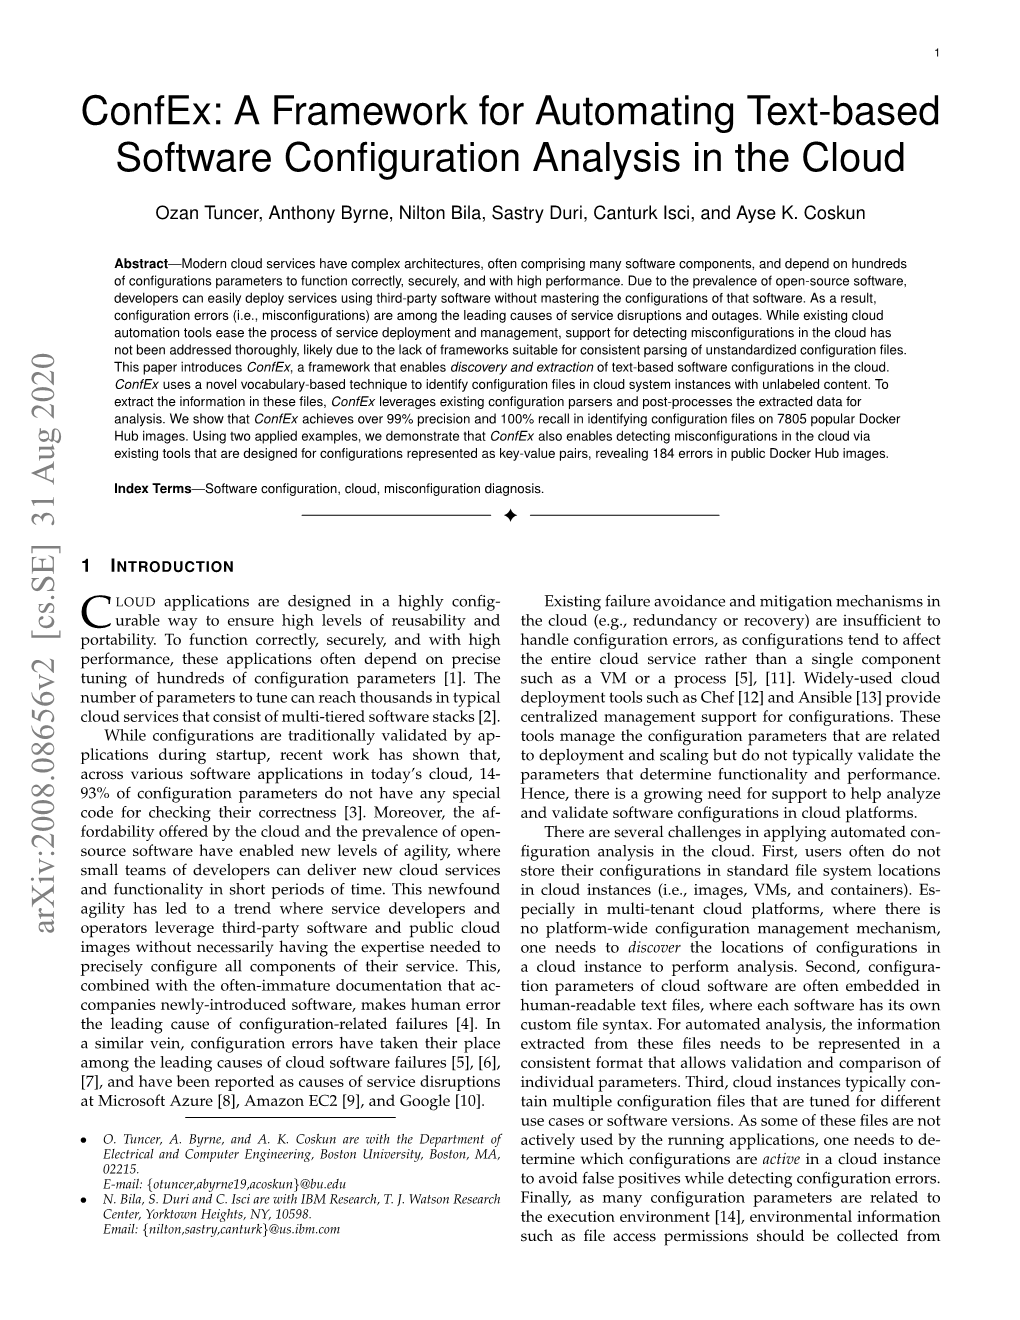 Confex: a Framework for Automating Text-Based Software Configuration